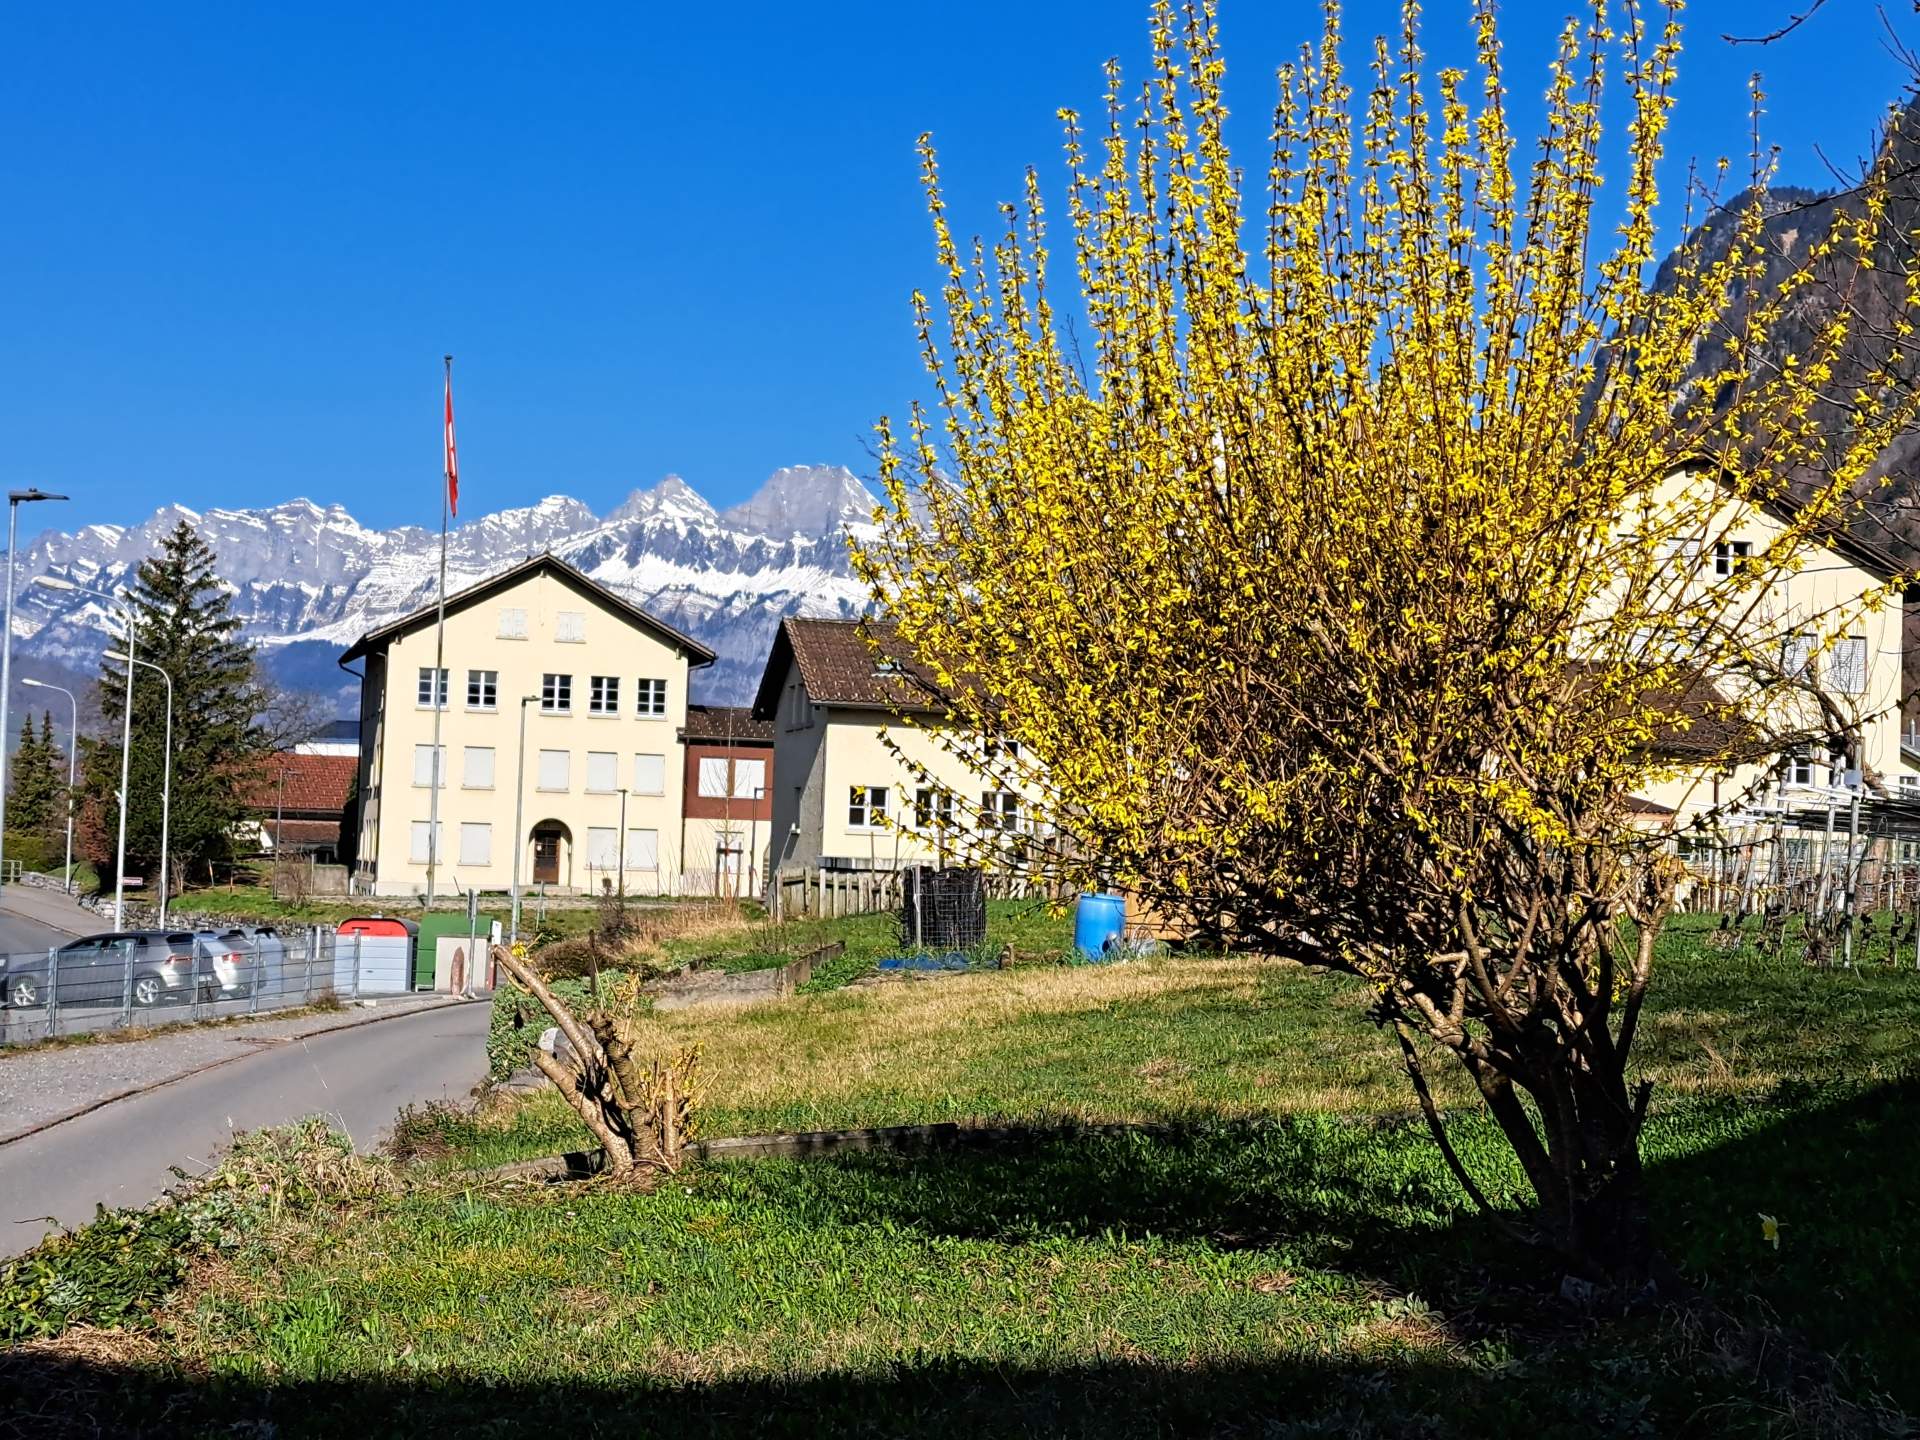 Fig. 4: Currently blooming forsythia bush in Sarganserland (in the background the snow-covered Churfirsten); Source: Roger Perret